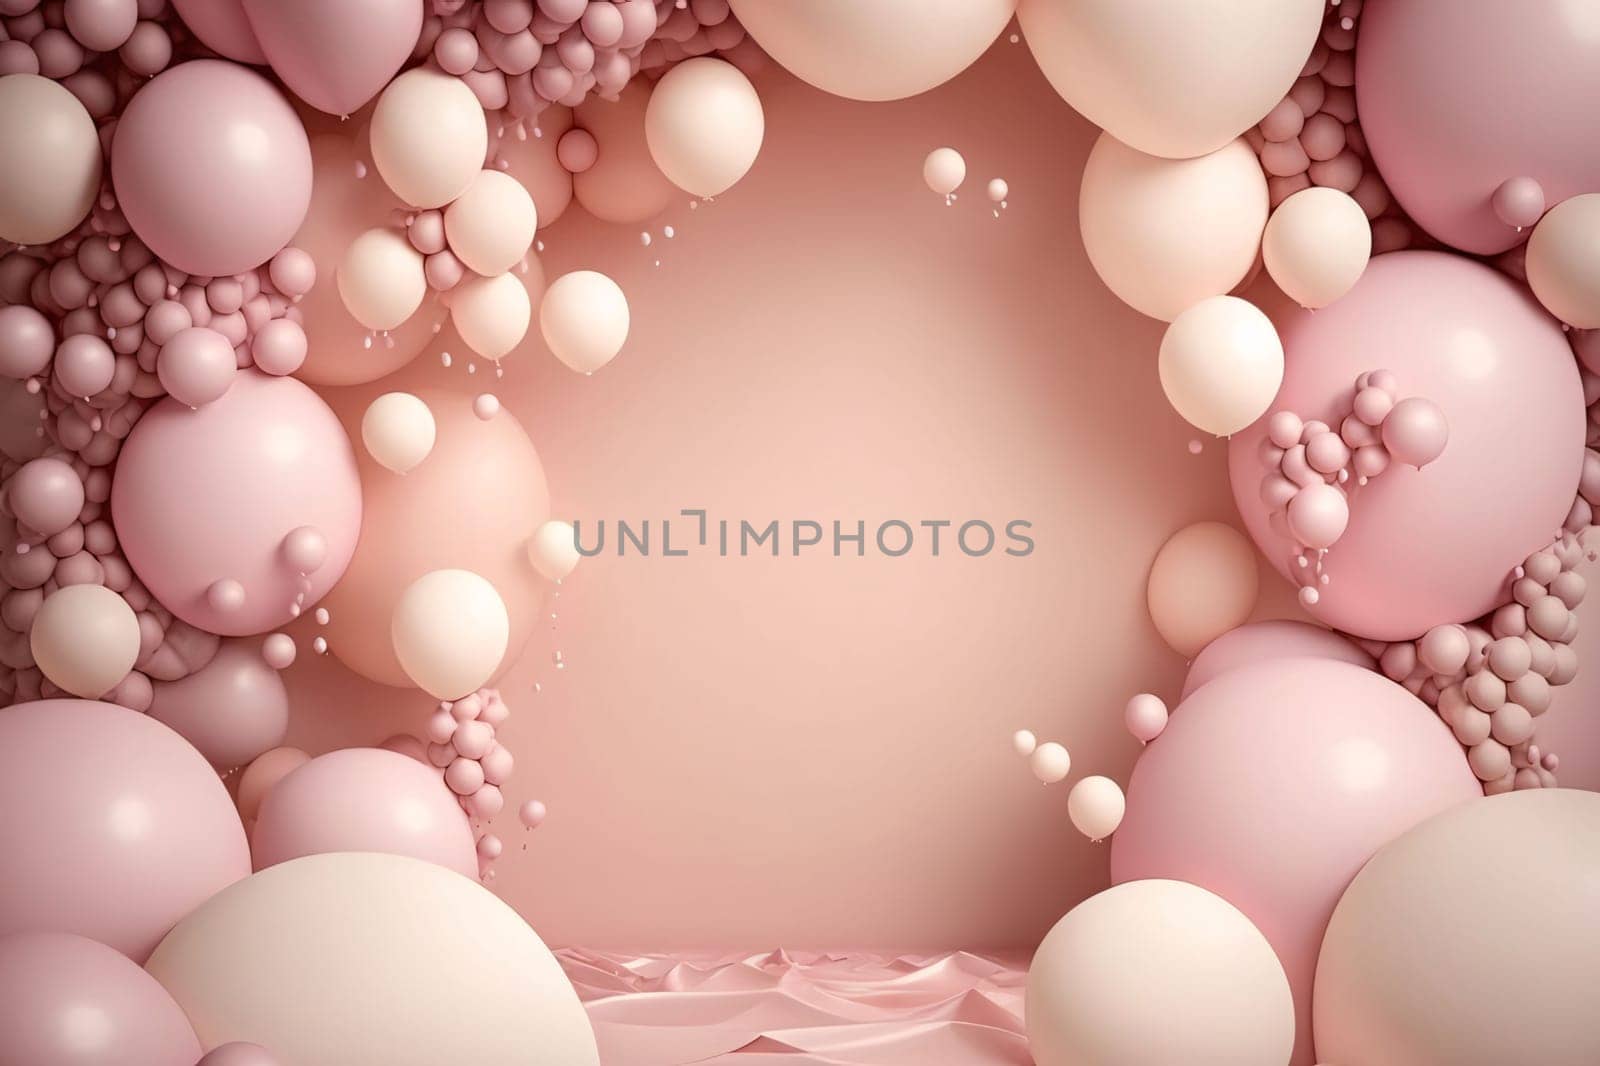 3d render of abstract background with pastel pink and white balloons by ThemesS